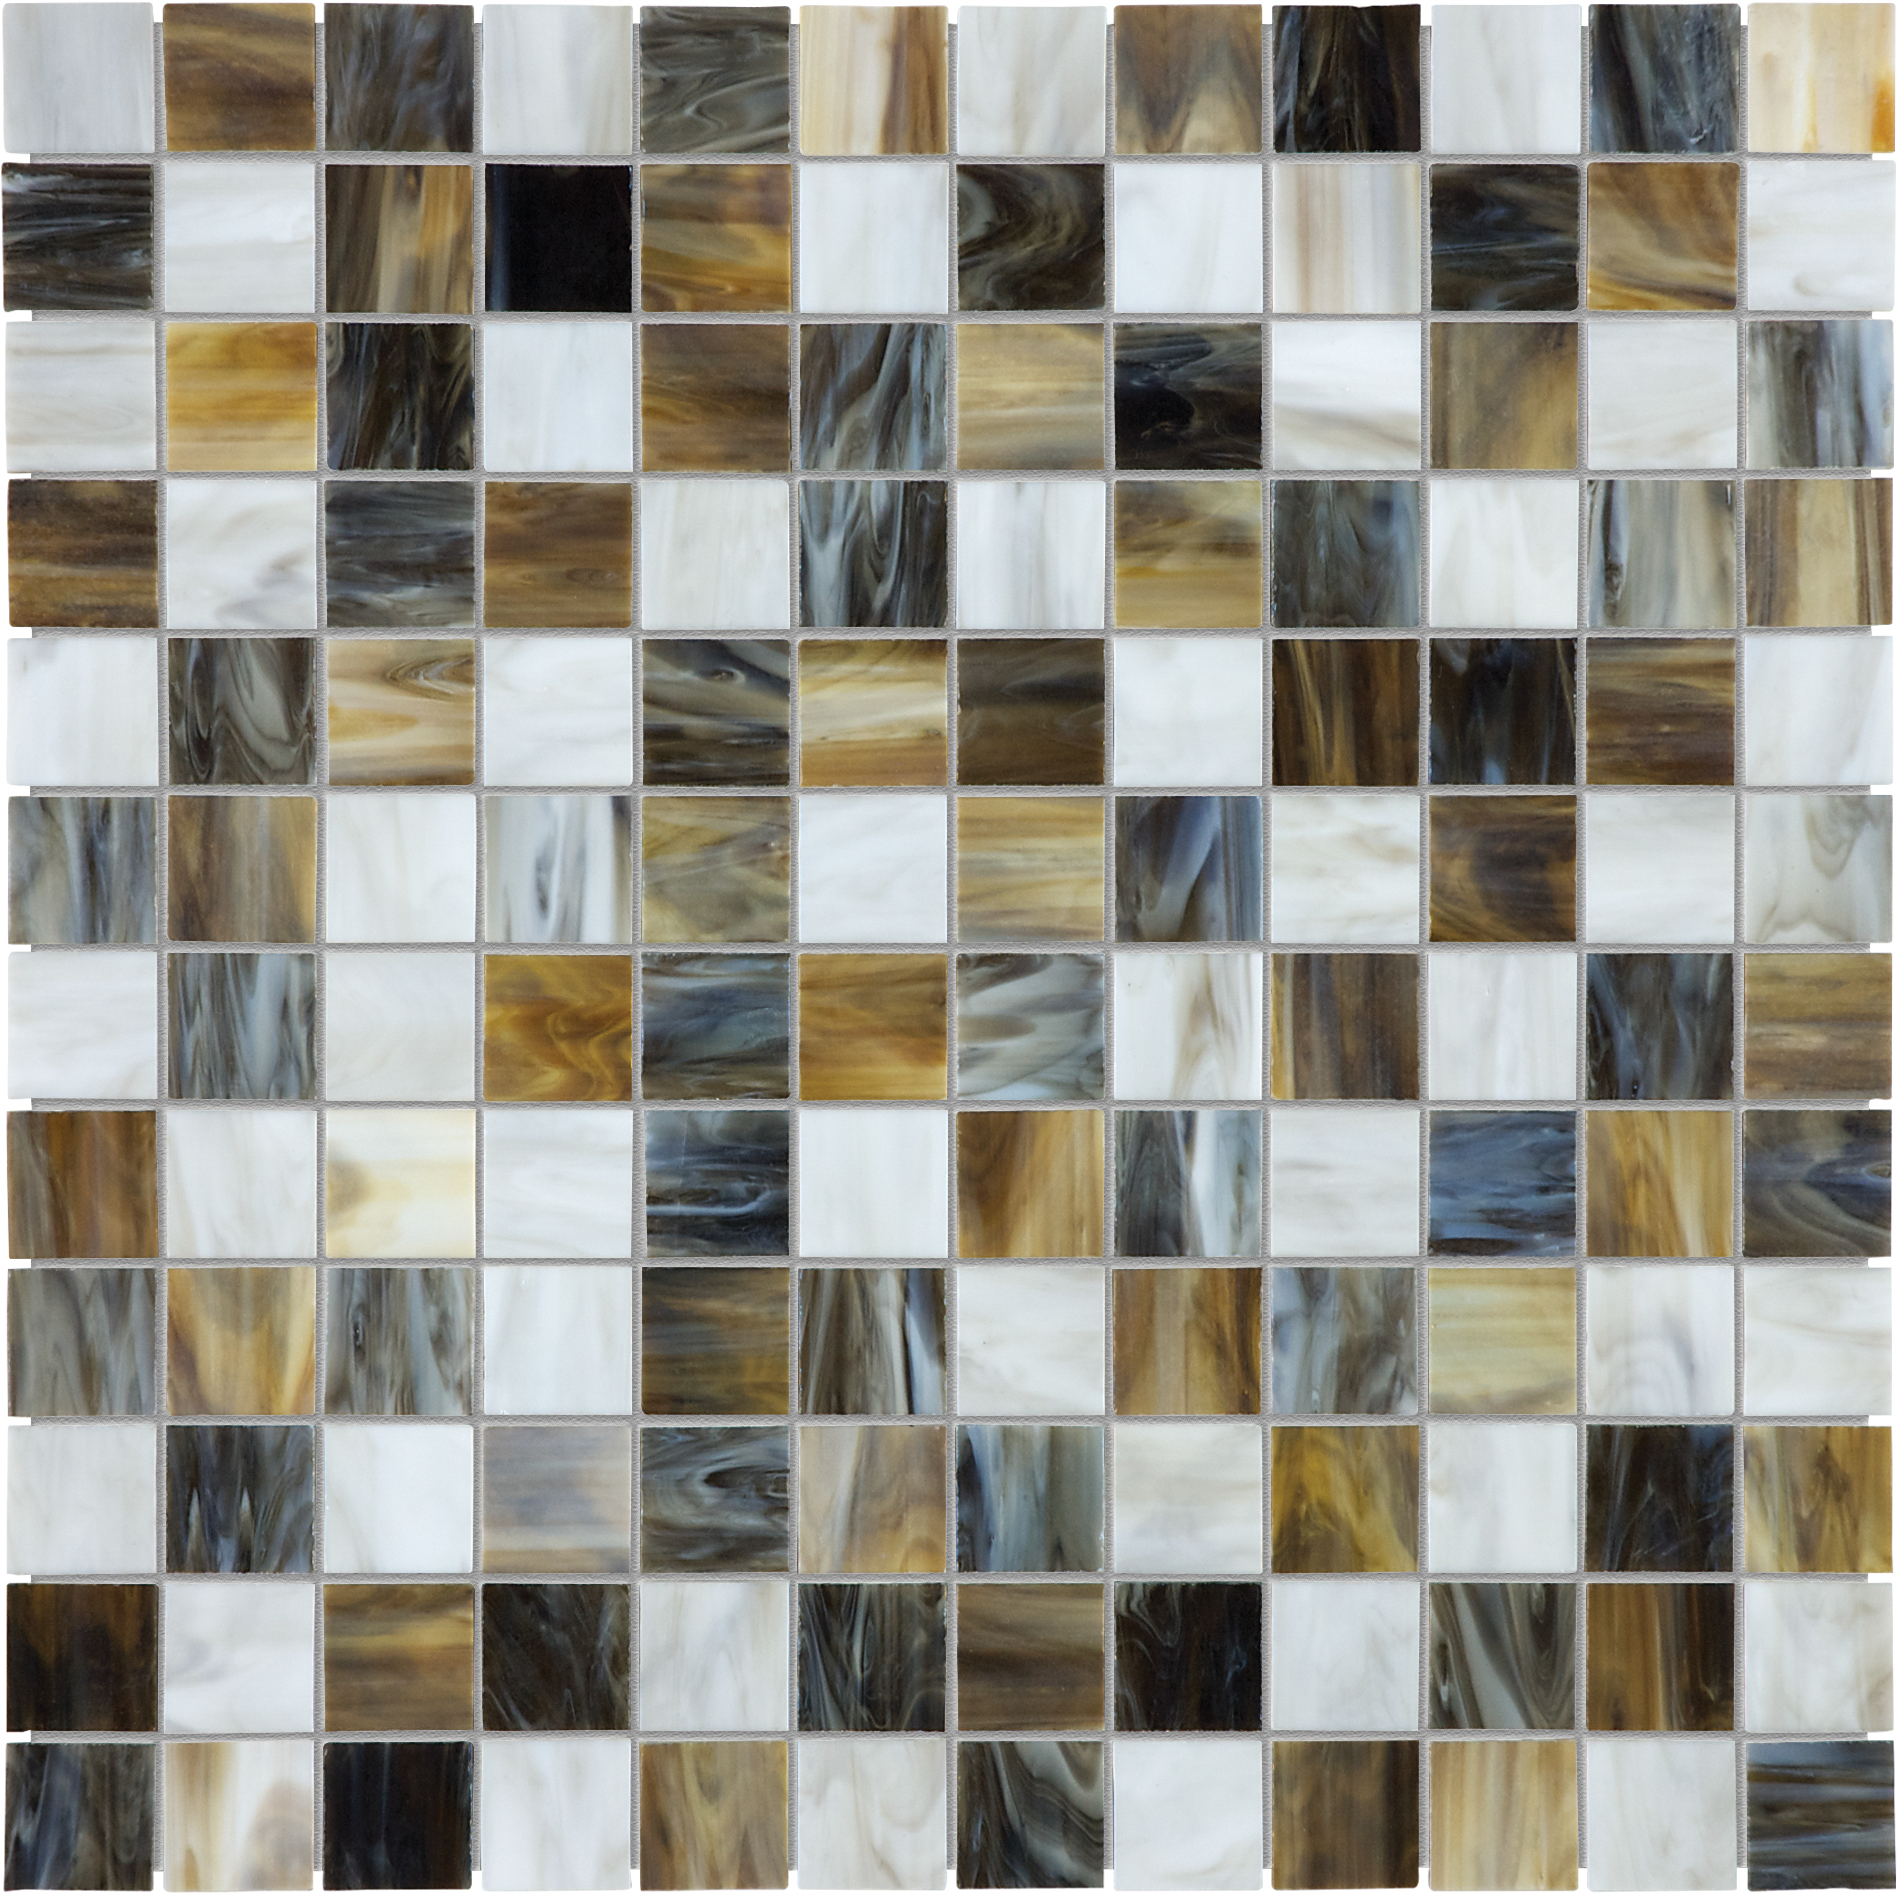 corallo straight stack 1x1-inch pattern fused glass mosaic from baroque anatolia collection distributed by surface group international glossy finish rounded edge mesh shape